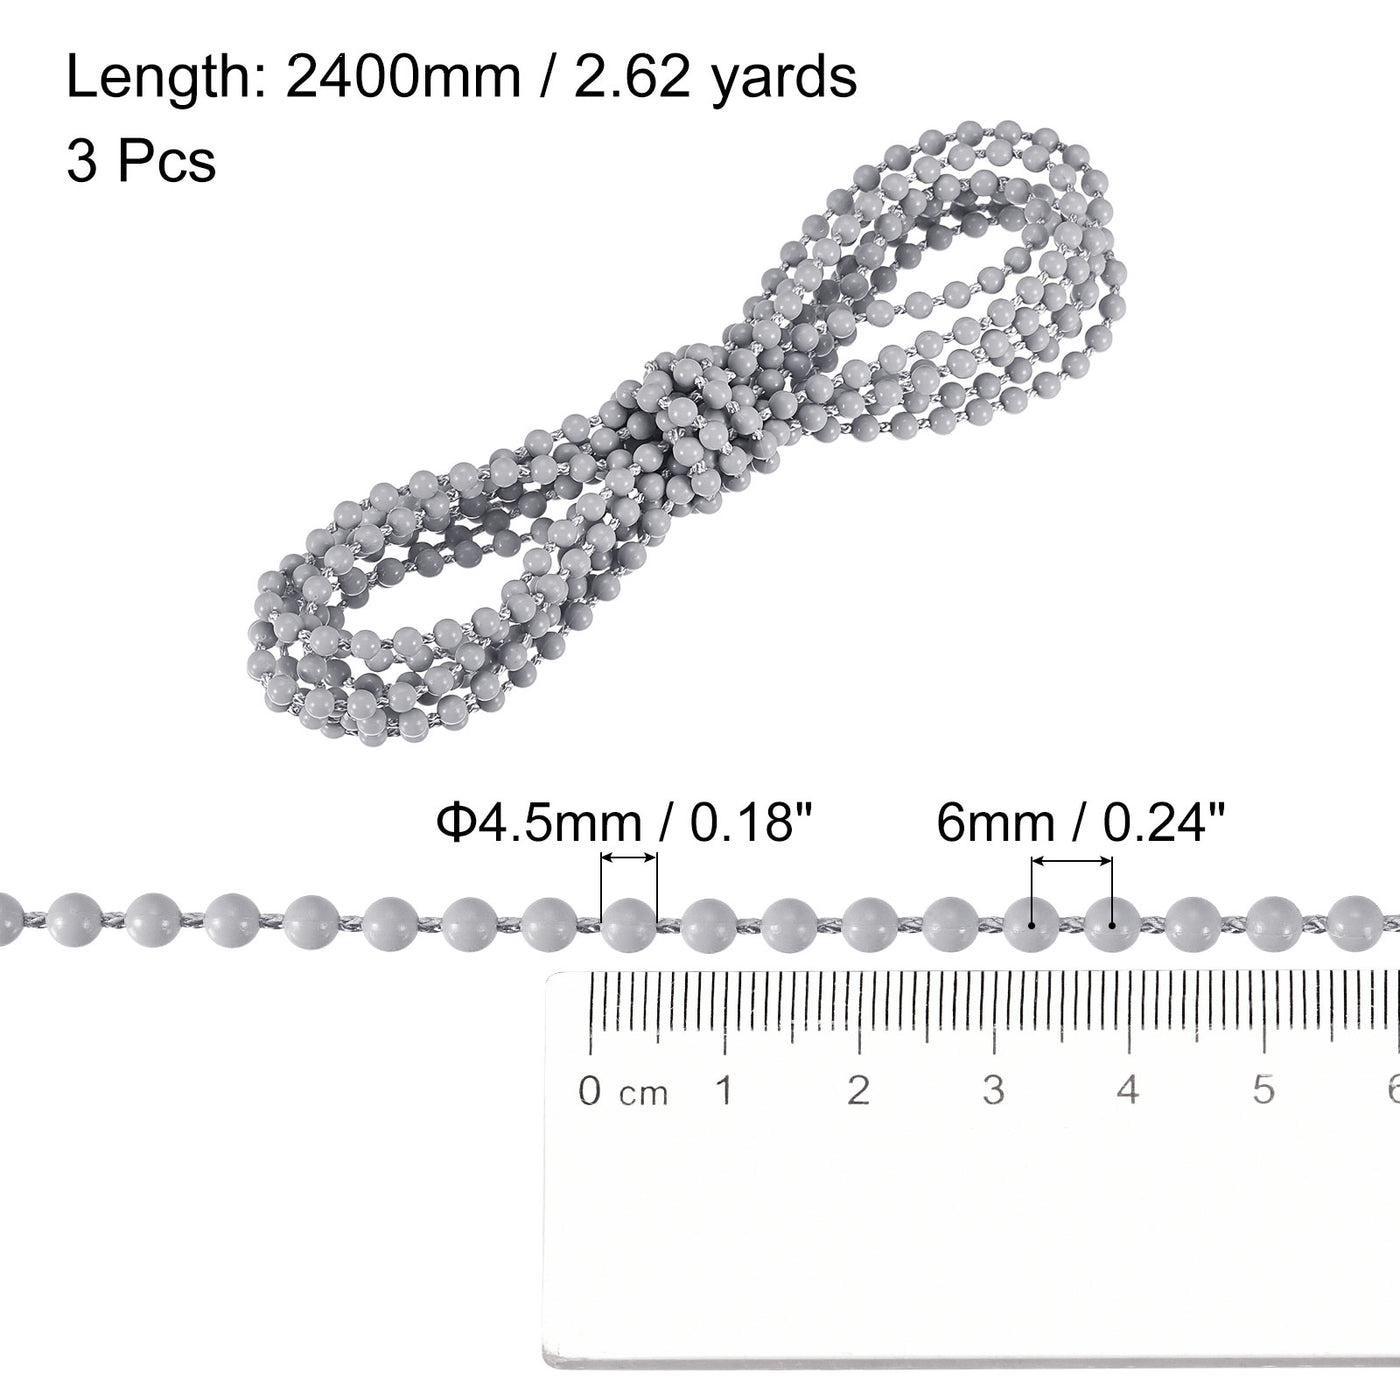 uxcell Uxcell 2.62 Yards Blinds Beaded Chain 3Pcs Roller Shade for Window Repair Parts, Grey